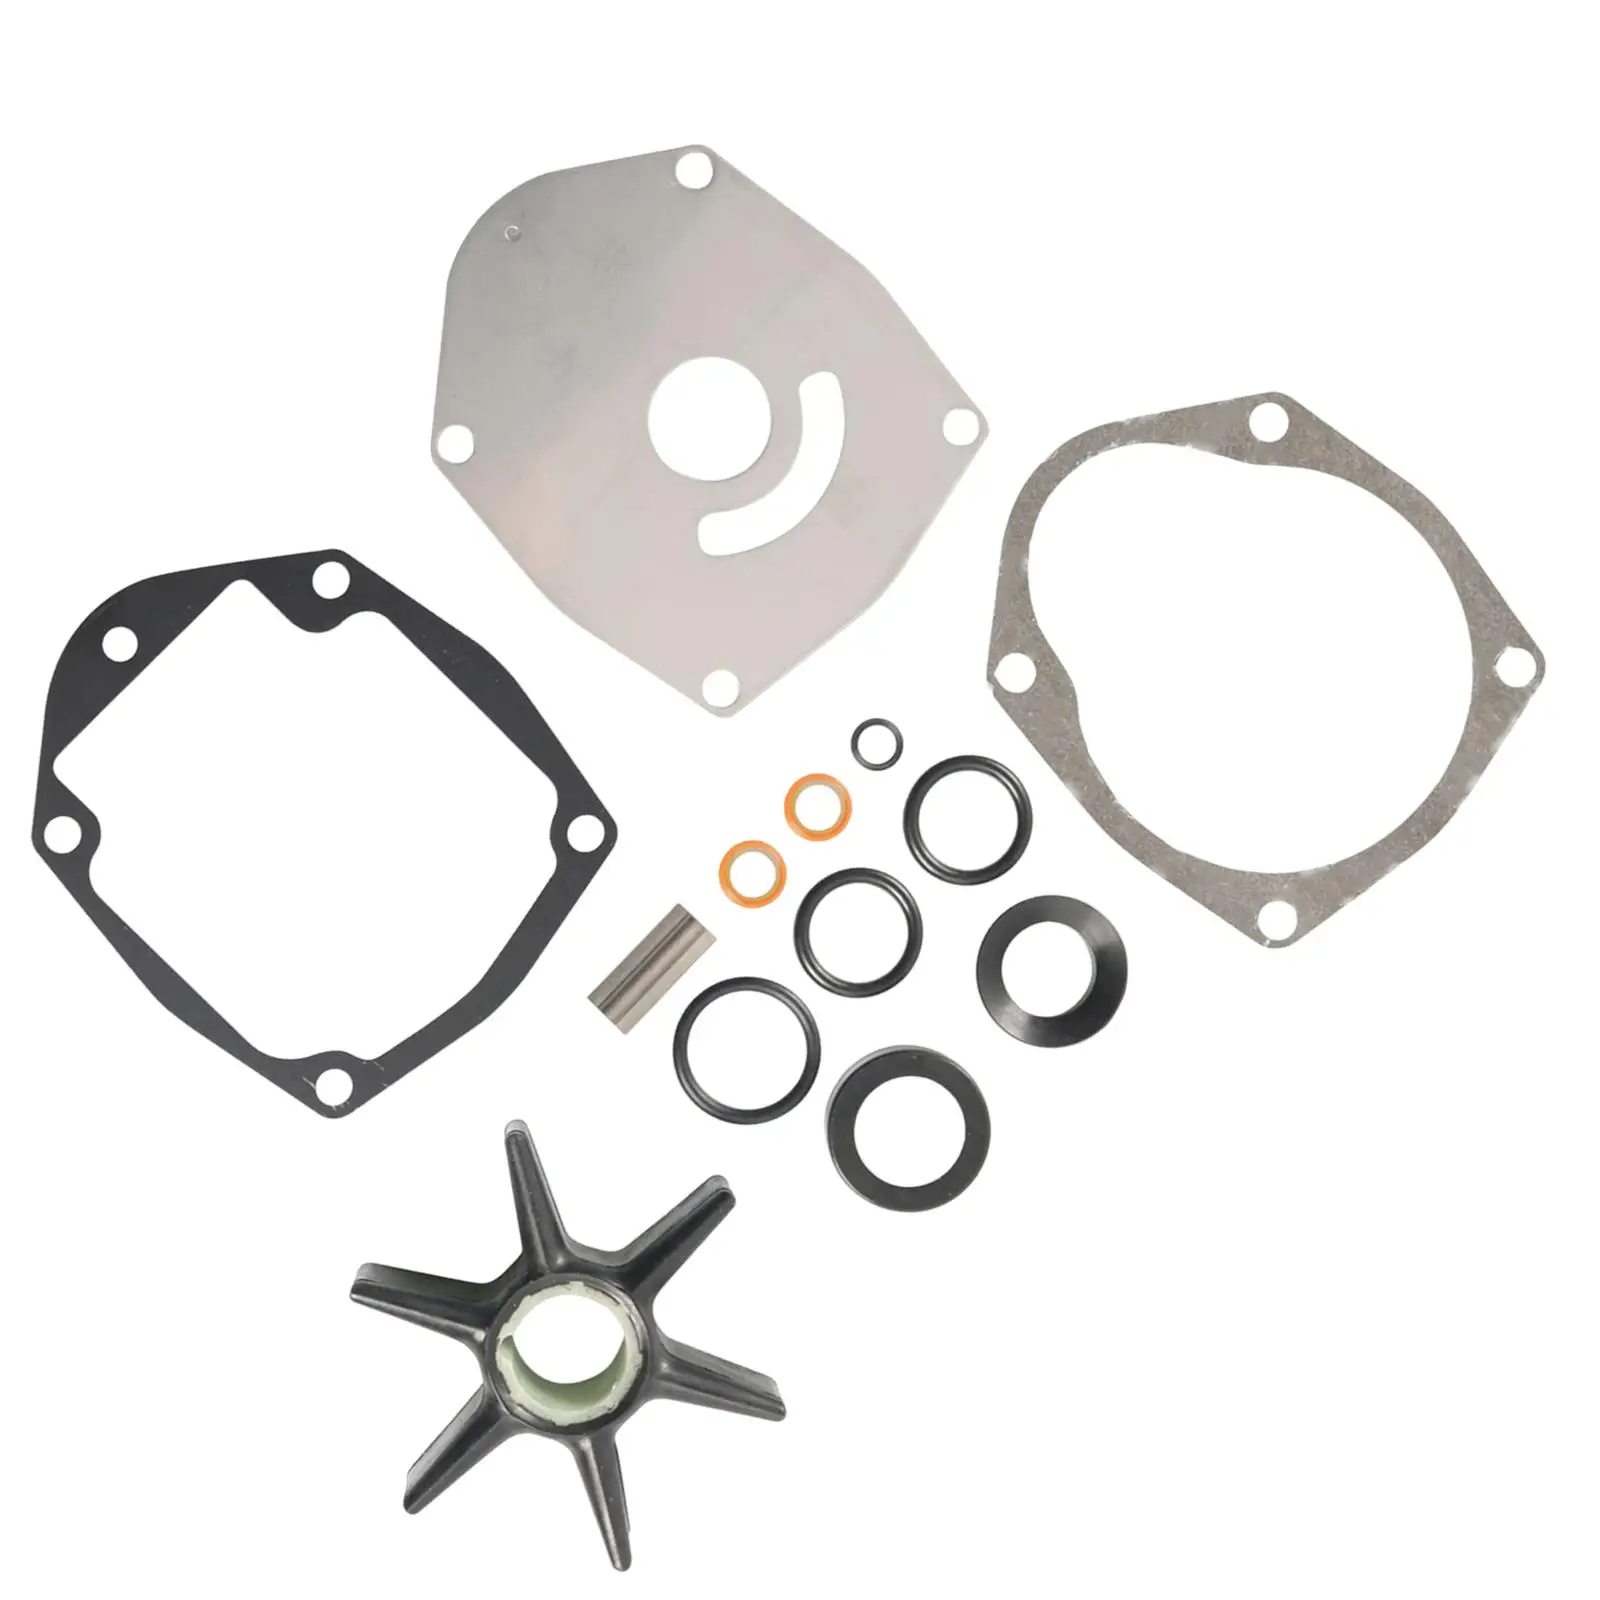 15 Pieces Water Pump Impeller Repair Kit, 8M0100526 for Mercury Marine Outboard Moters 47-43026T6